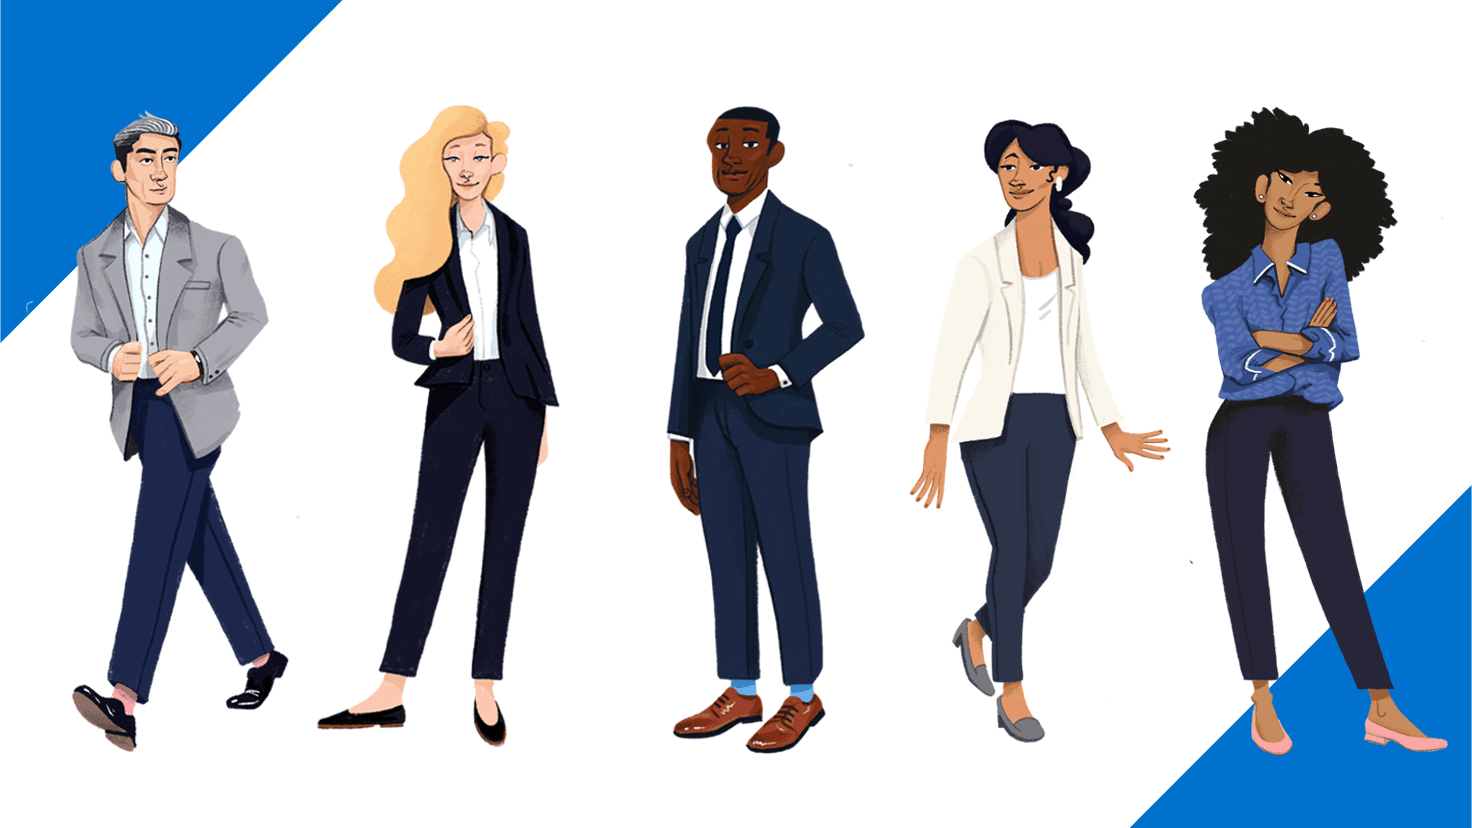 Tips To Dress Up For Interview / Interview Dress Code for Female!